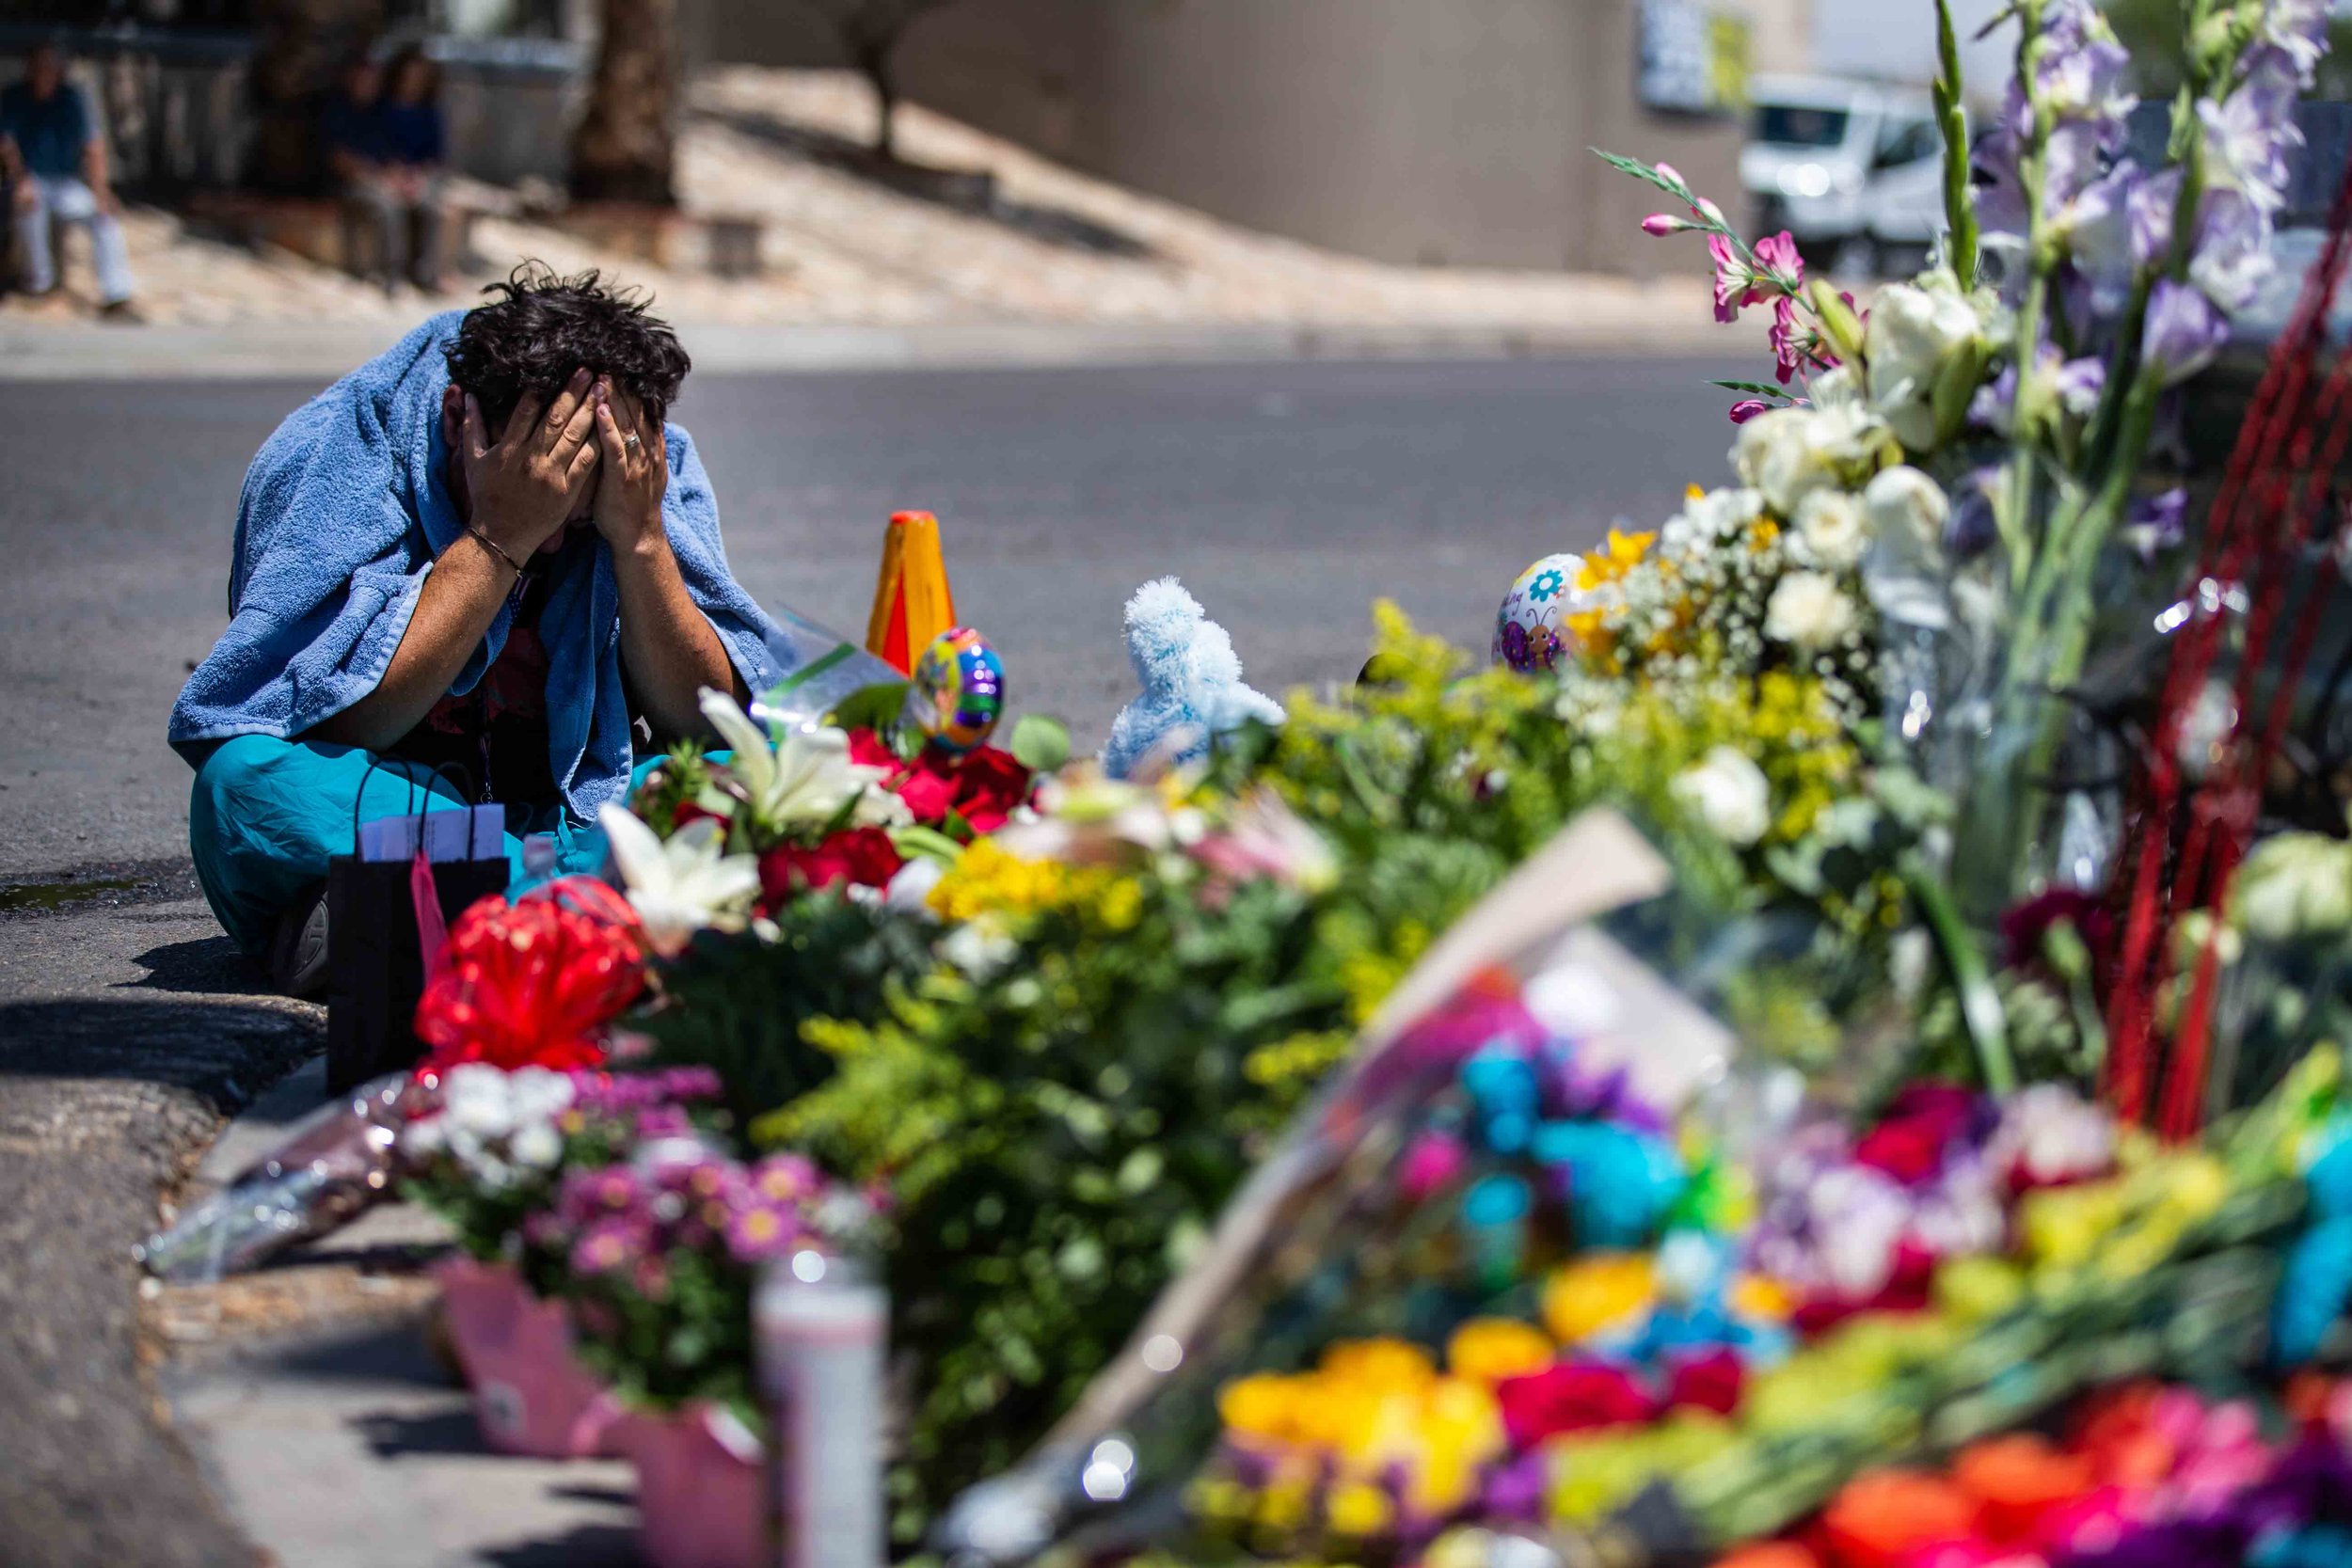  Felipe Avila puts his head in his hands as he cries at the place where the locals bring flowers, stuffed animals, candels and posters to honor the memory of the victims of the mass shooting occurred in Walmart on Saturday morning in El Paso on Sunda